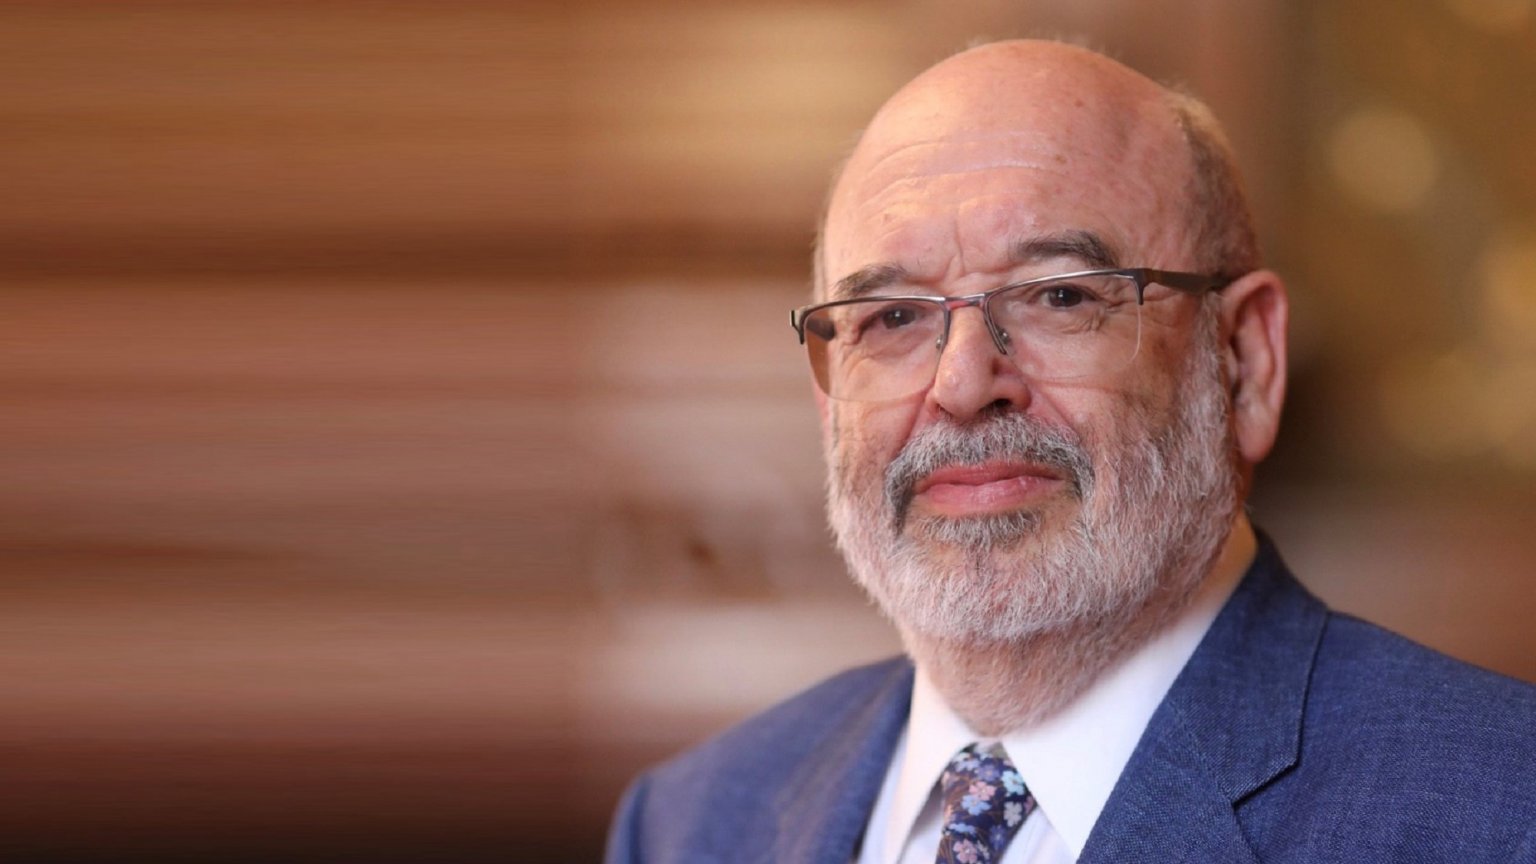 Reflections on Human Potential and Resilience: A Response by Peter Gluckman